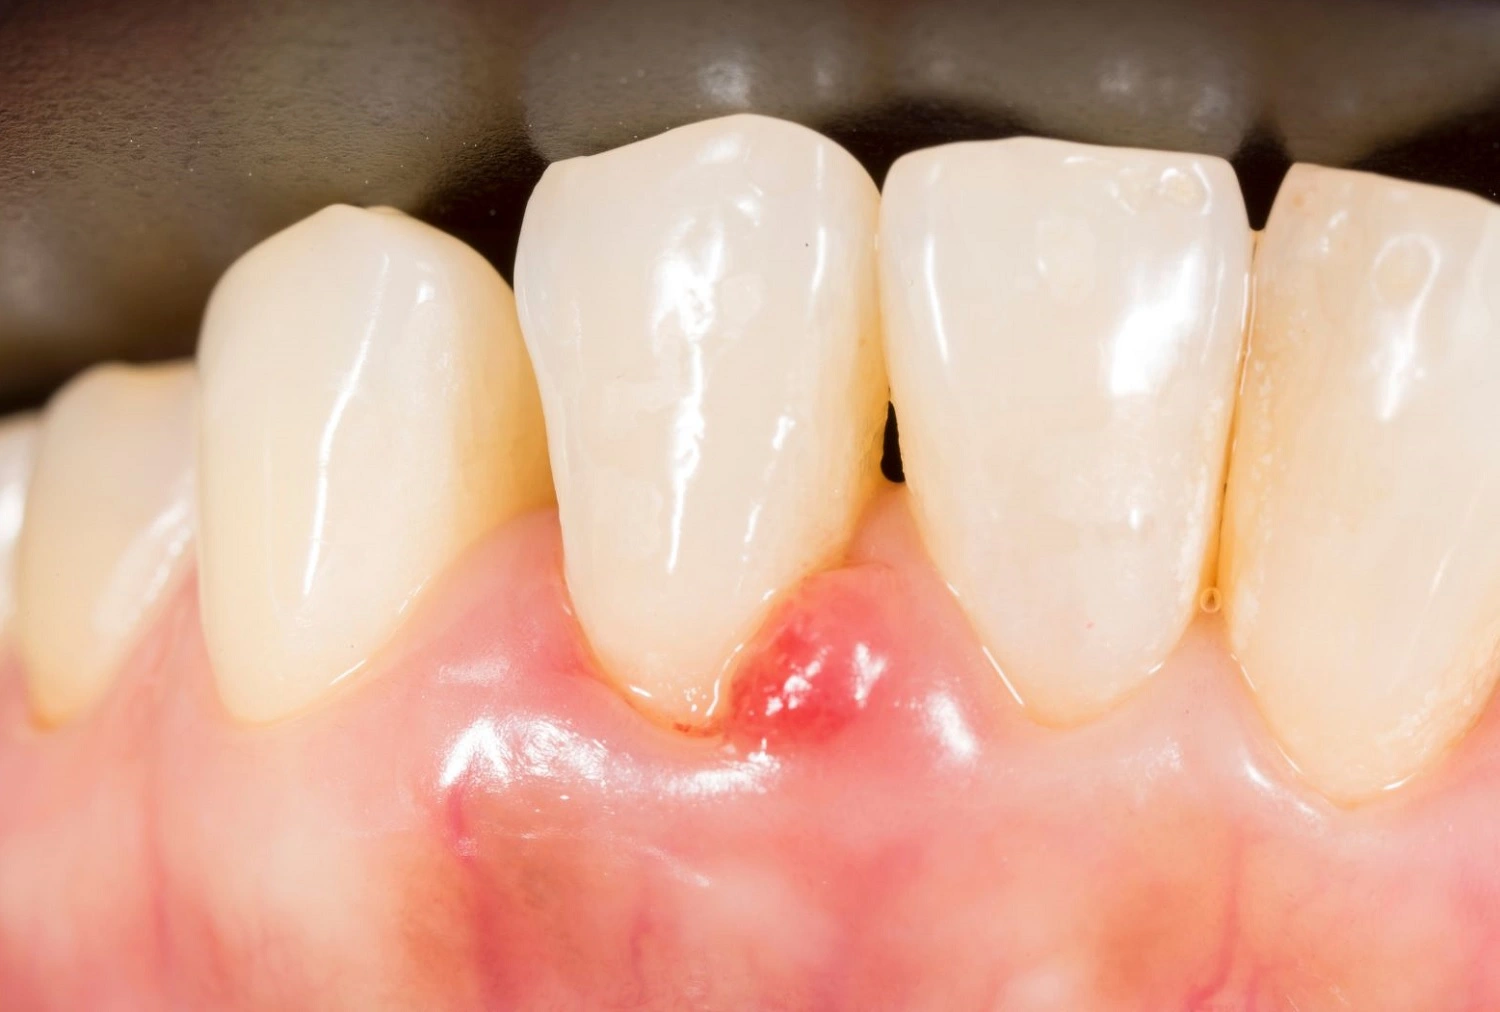 gingival-hyperplasia-from-nifedipine-and-dental-health